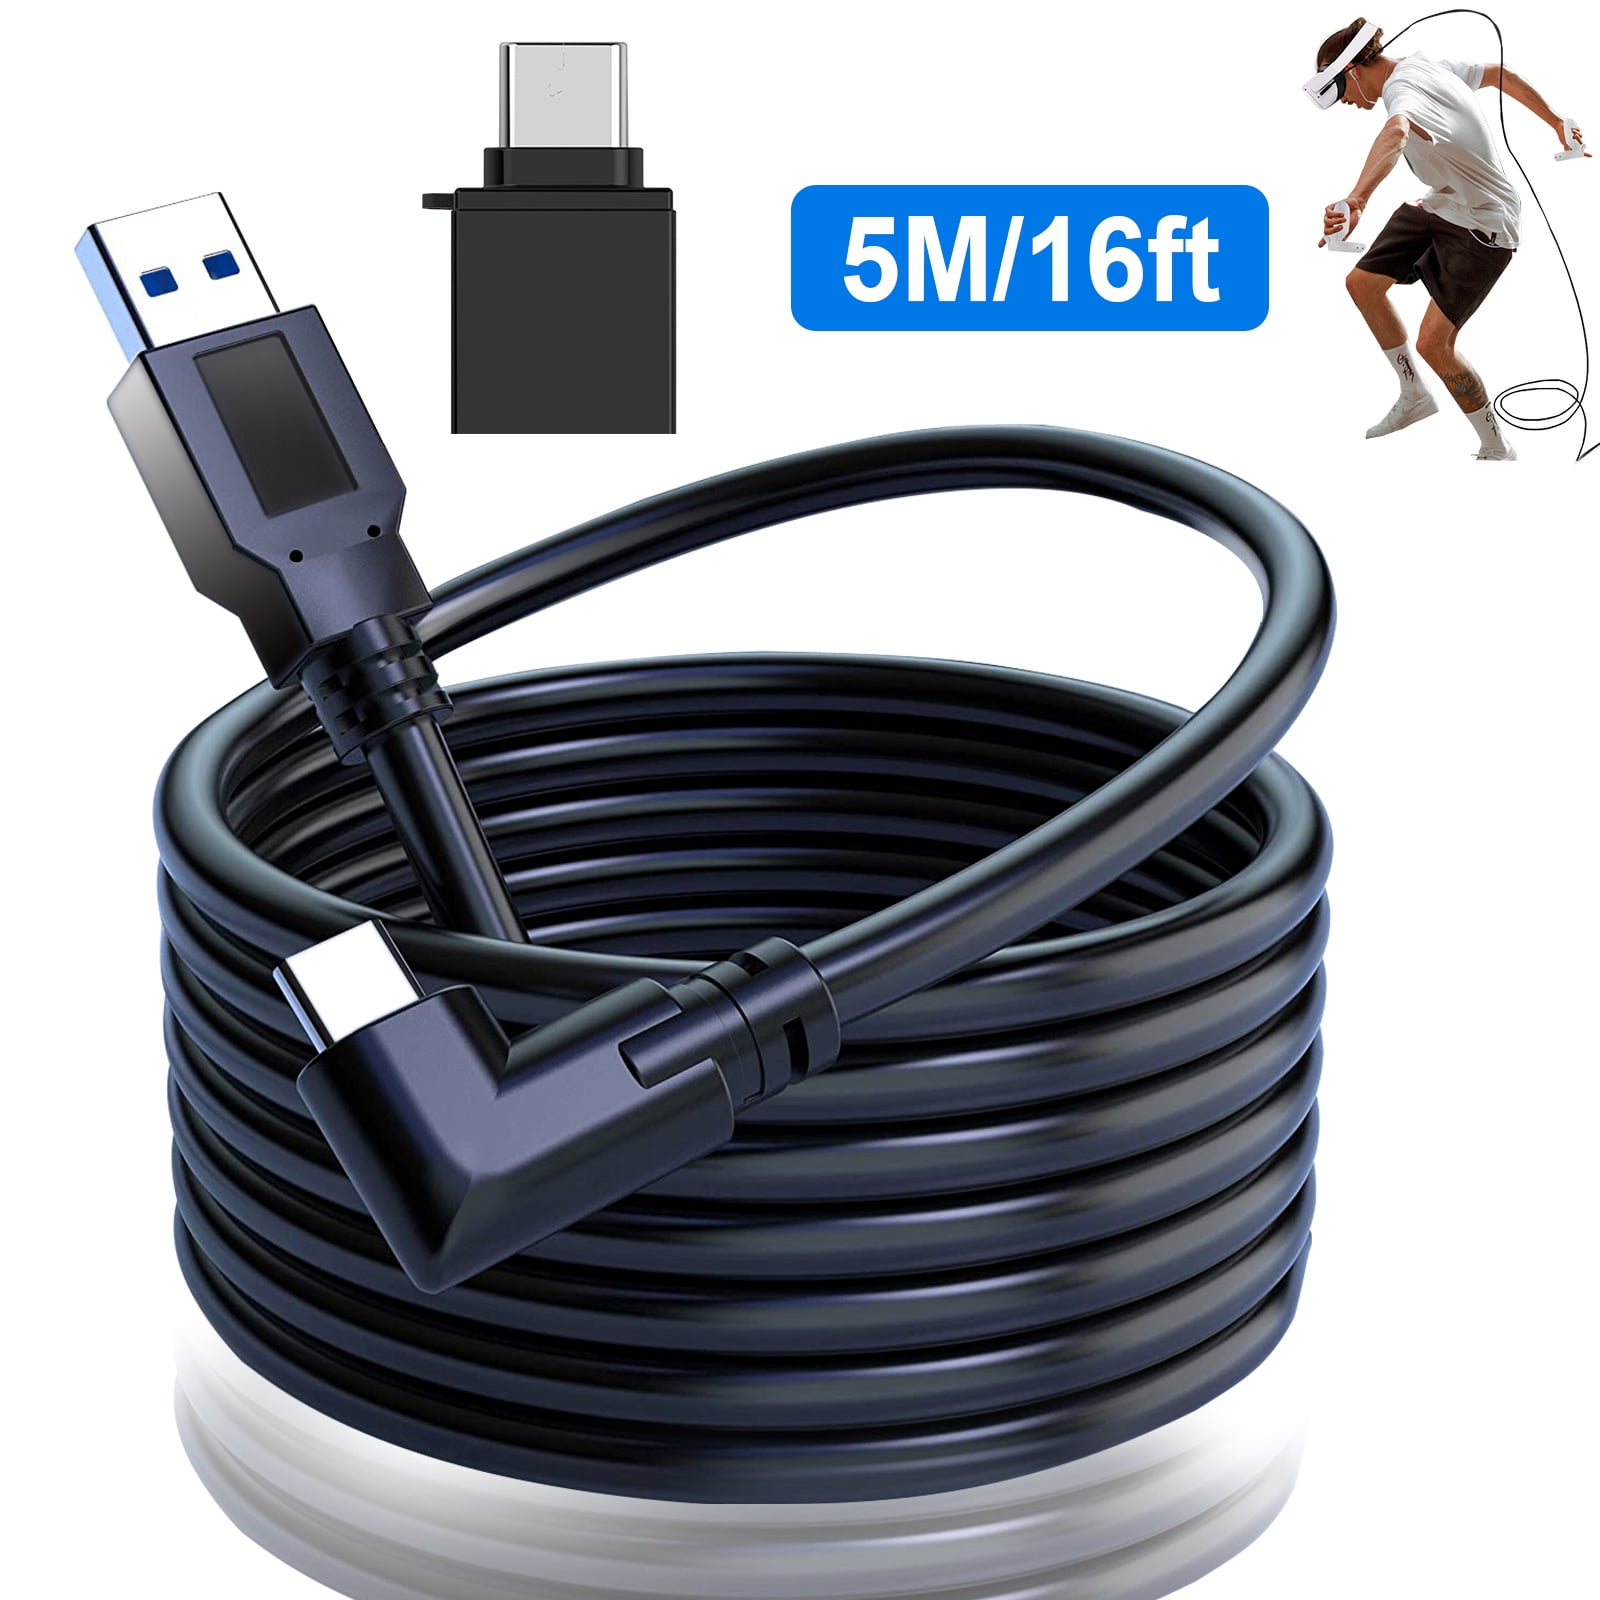 5M/16ft VR Link Cable USB C Cable Oculus Quest 2 High Speed Data Transfer  Fast Charging Cable - AliExpress